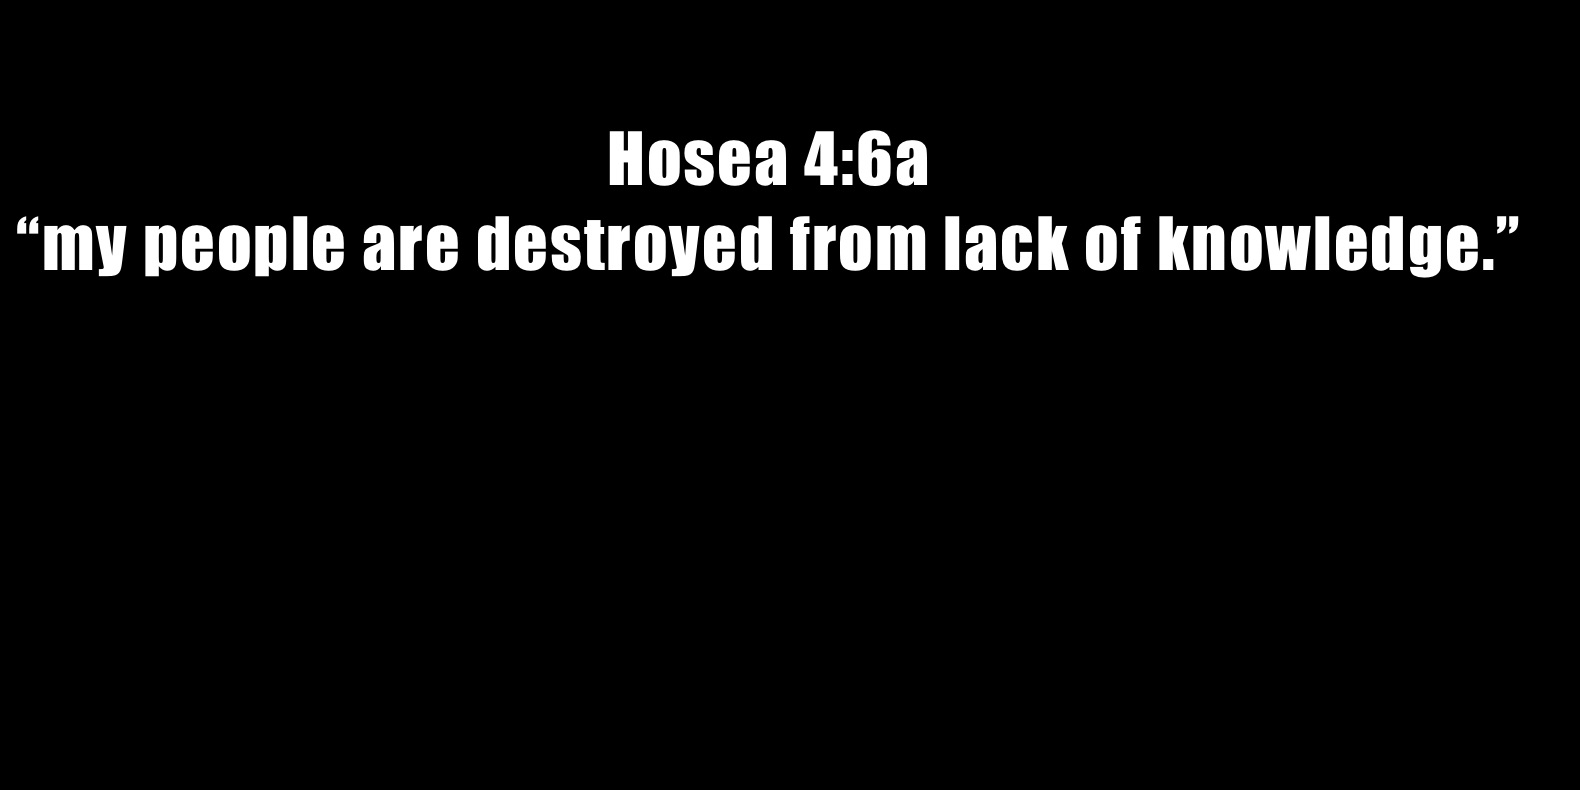 Hosea 4:6a 
“my people are destroyed from lack of knowledge.”